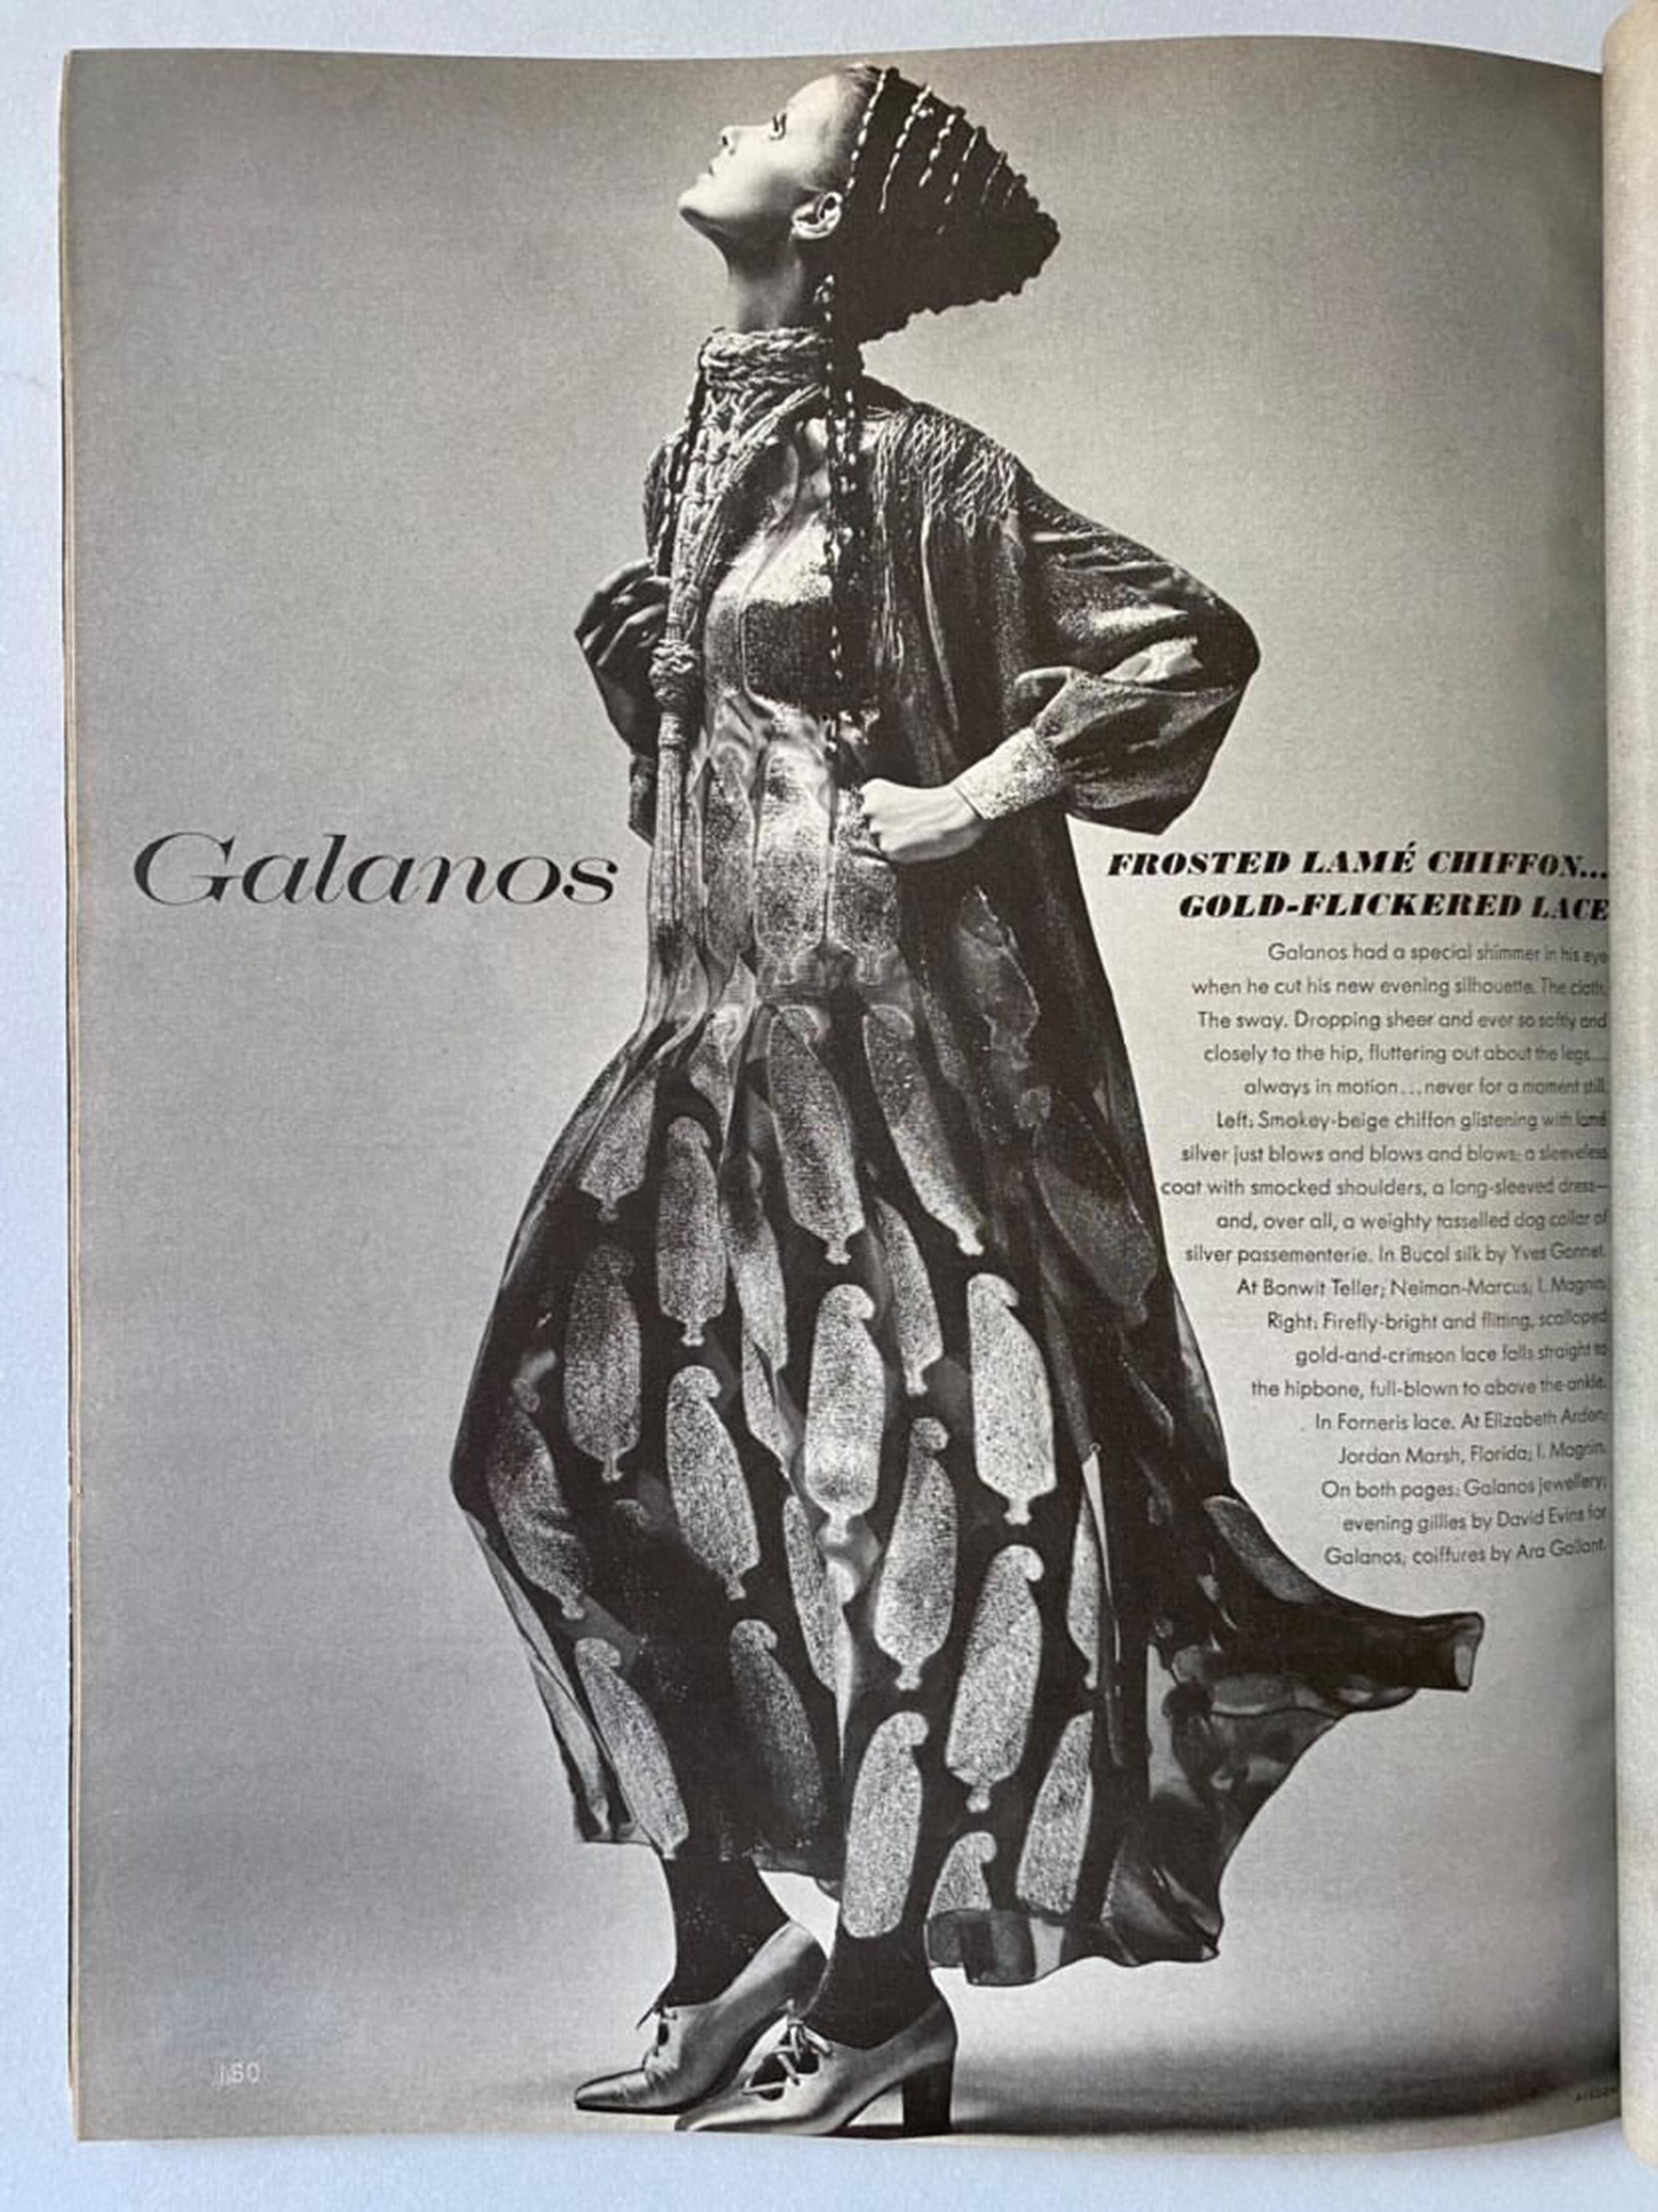 An important and well-documented Galanos metallic silk gown ensemble dating back to fall-winter 1970. Dedication to excellence in craftsmanship and design was the foundation of James Galanos' career. The quality of workmanship found in his clothing